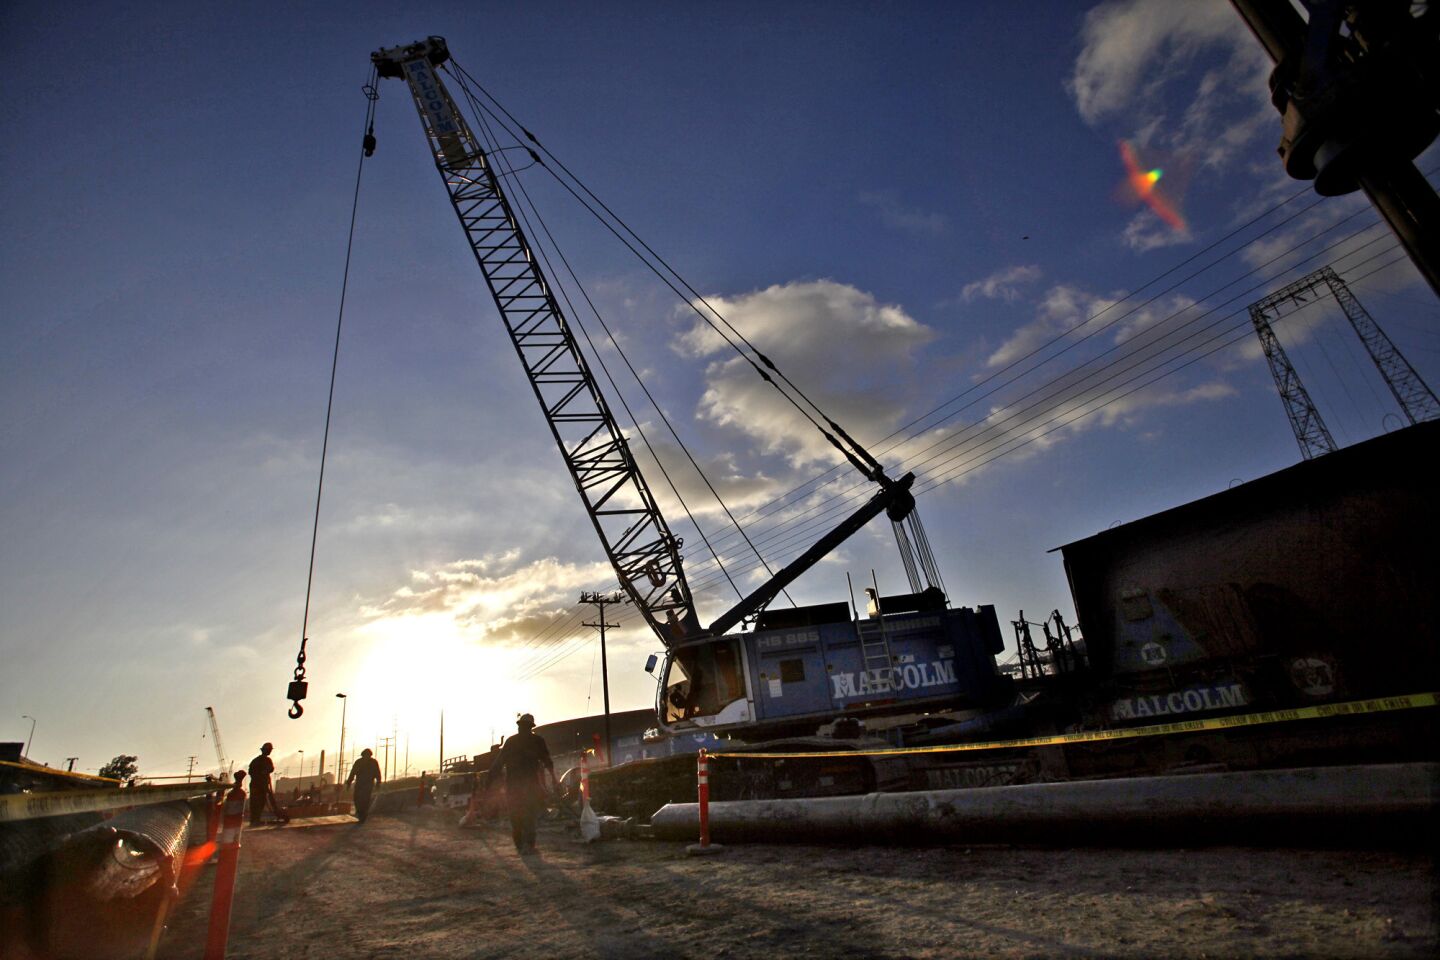 A giant crane swings a hook to pick up metal plating in preparation for constructing the new bridge.